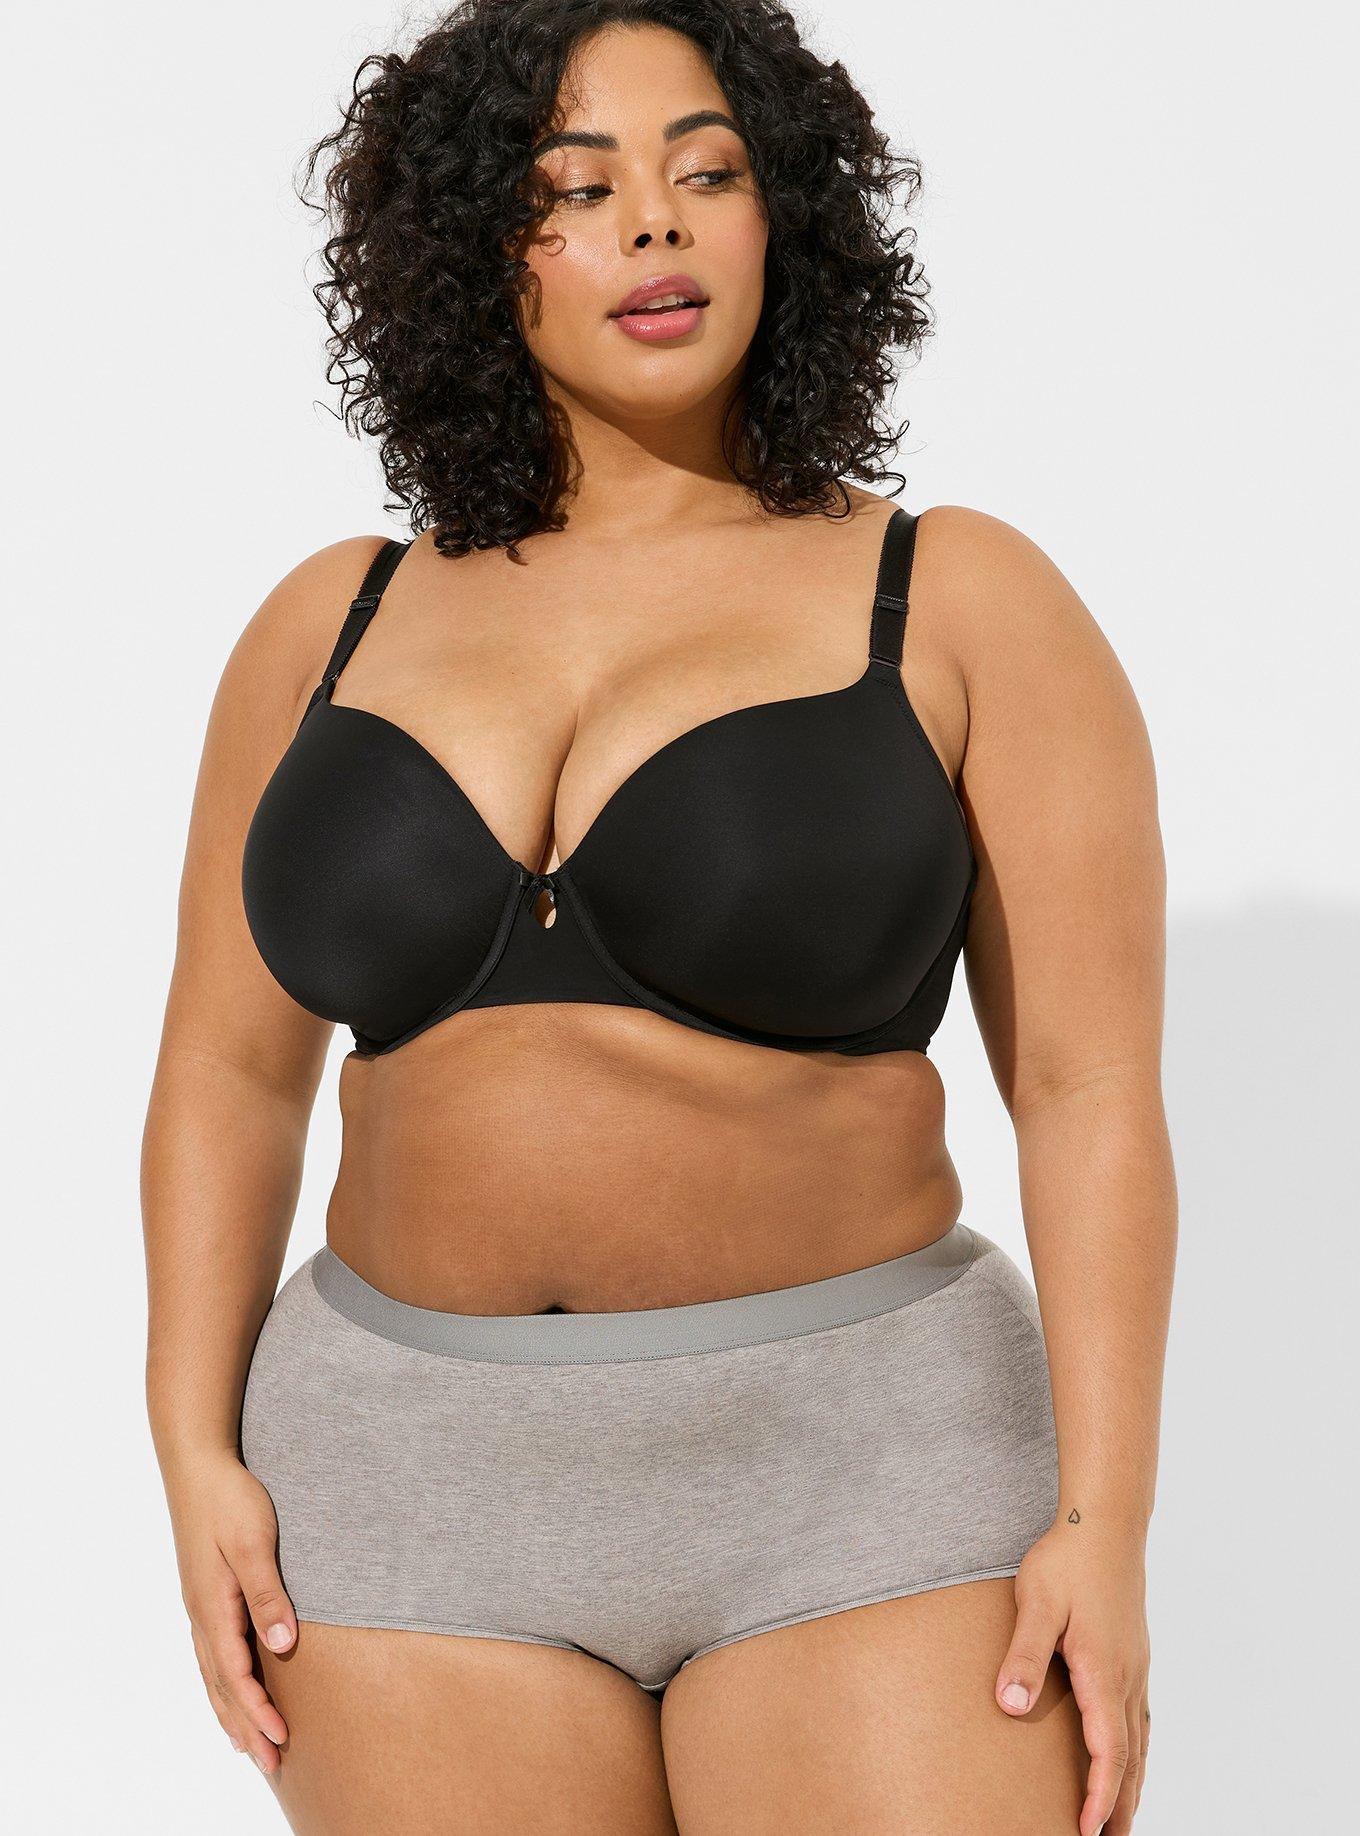 Plus Size High Waisted Panties & Underwear